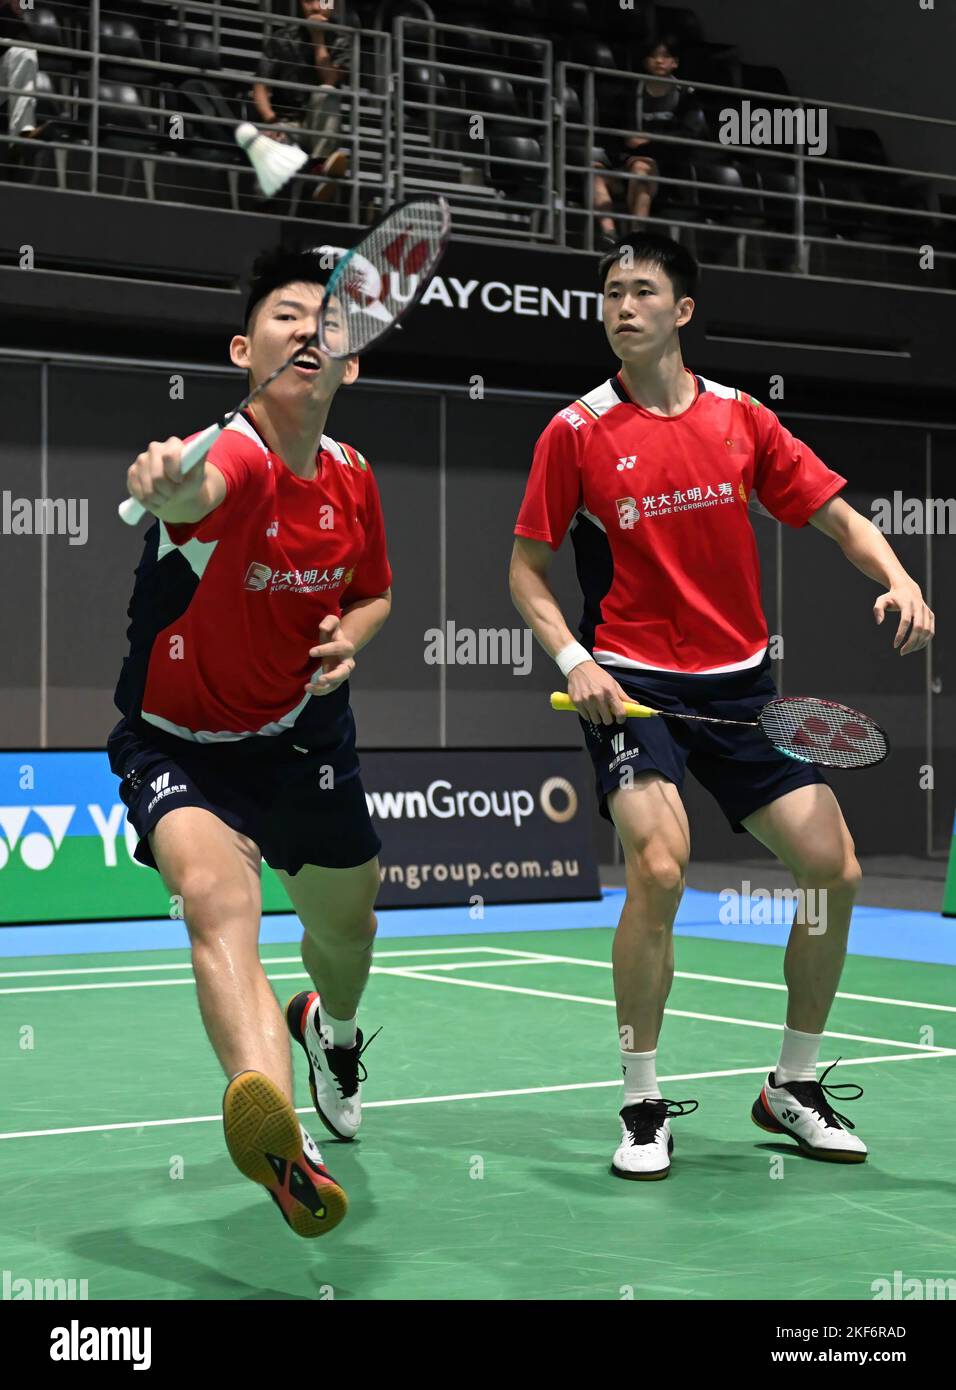 Sydney, Australia. 16th Nov, 2022. Liu Yu Chen (L) and Ou Xuan Yi (R) of China are seen during the 2022 SATHIO GROUP Australian Badminton Open Round of 32 Men's Double match against Ren Xiang Yu and Tan Qiang of China. Liu and Ou won the match 21-18, 21-12. Credit: SOPA Images Limited/Alamy Live News Stock Photo